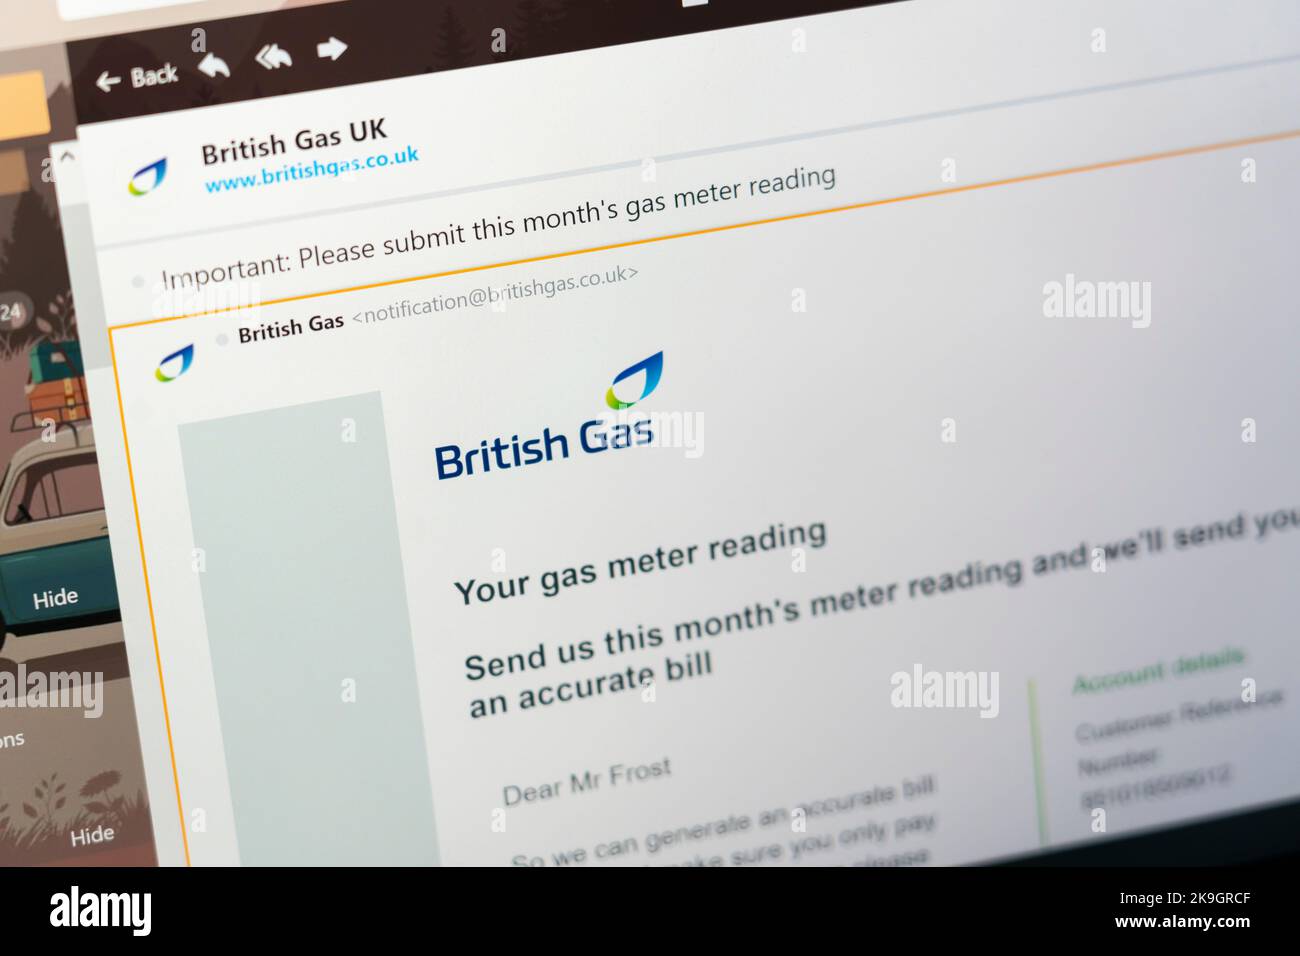 Email to a UK customer from British Gas asking that a gas meter reading is provided to allow an accurate bill to be charged to the consumer. England Stock Photo